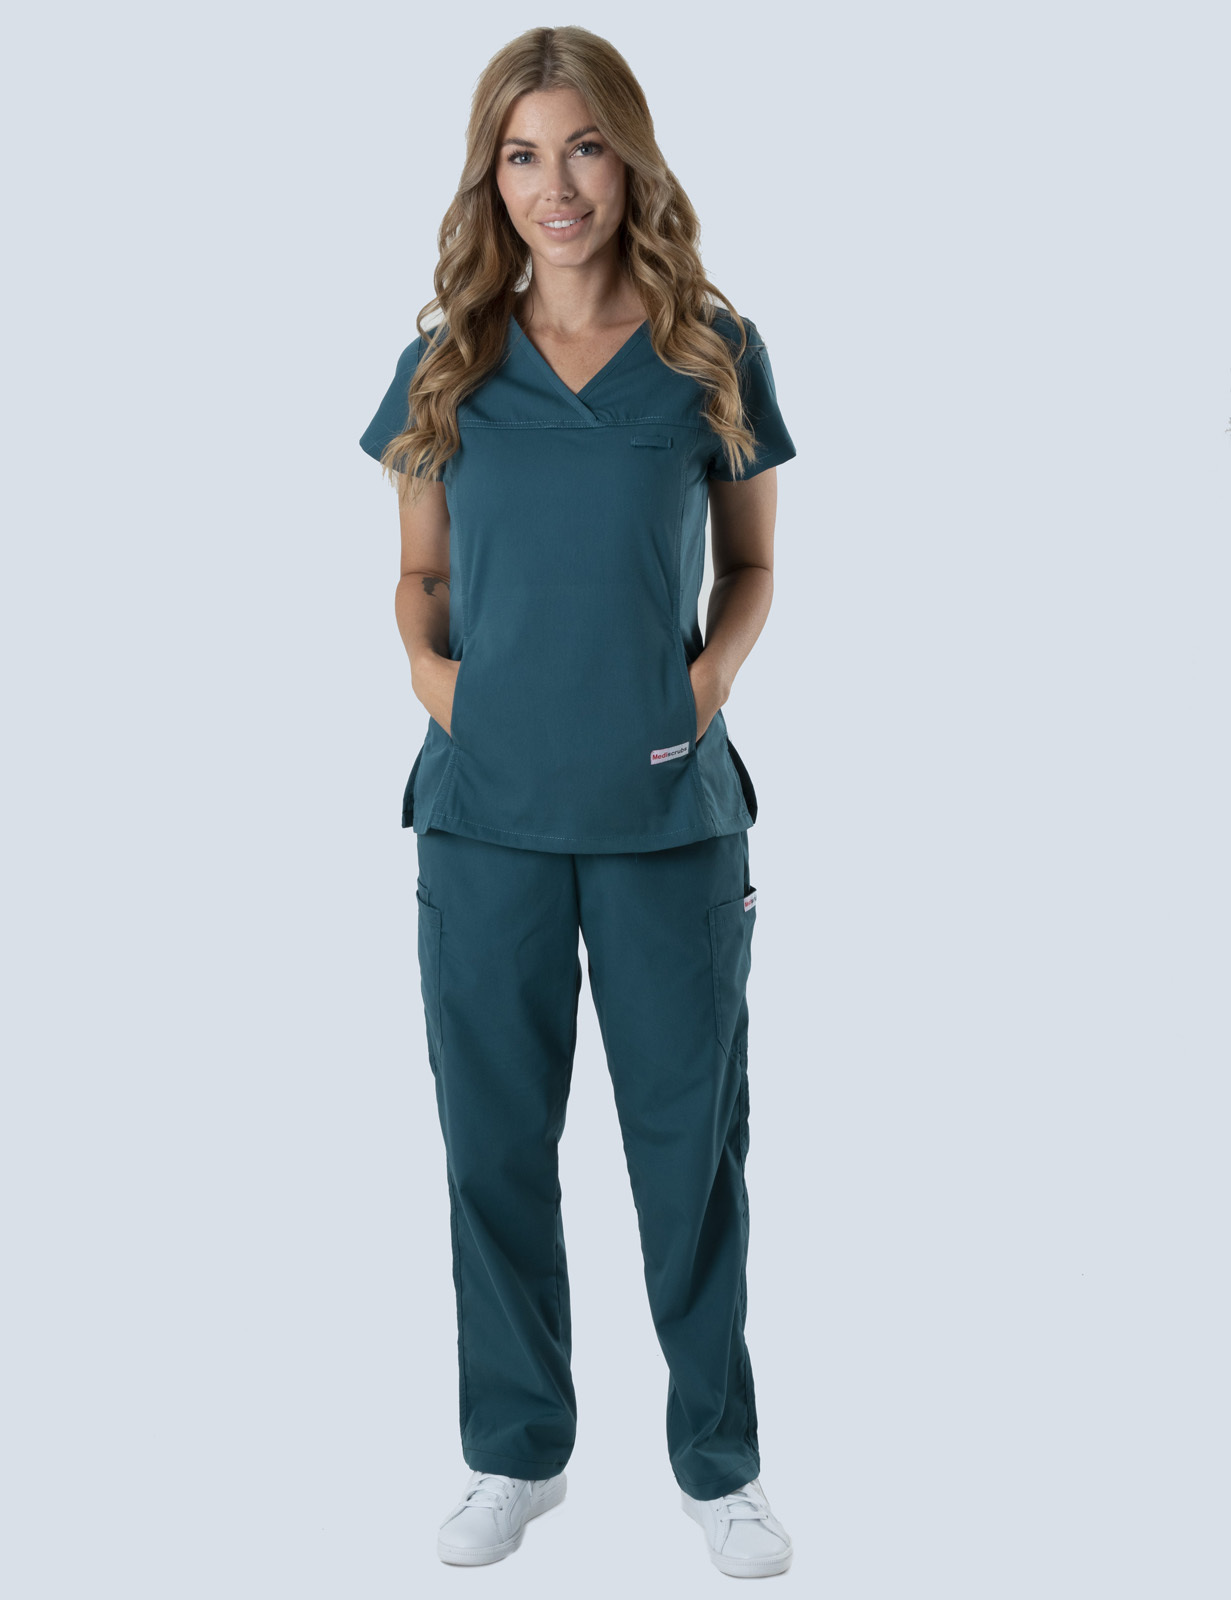 Prince Charles Hospital - ED Registered Nurse (Women's Fit Solid Scrub Top and Cargo Pants in Caribbean incl Logos)